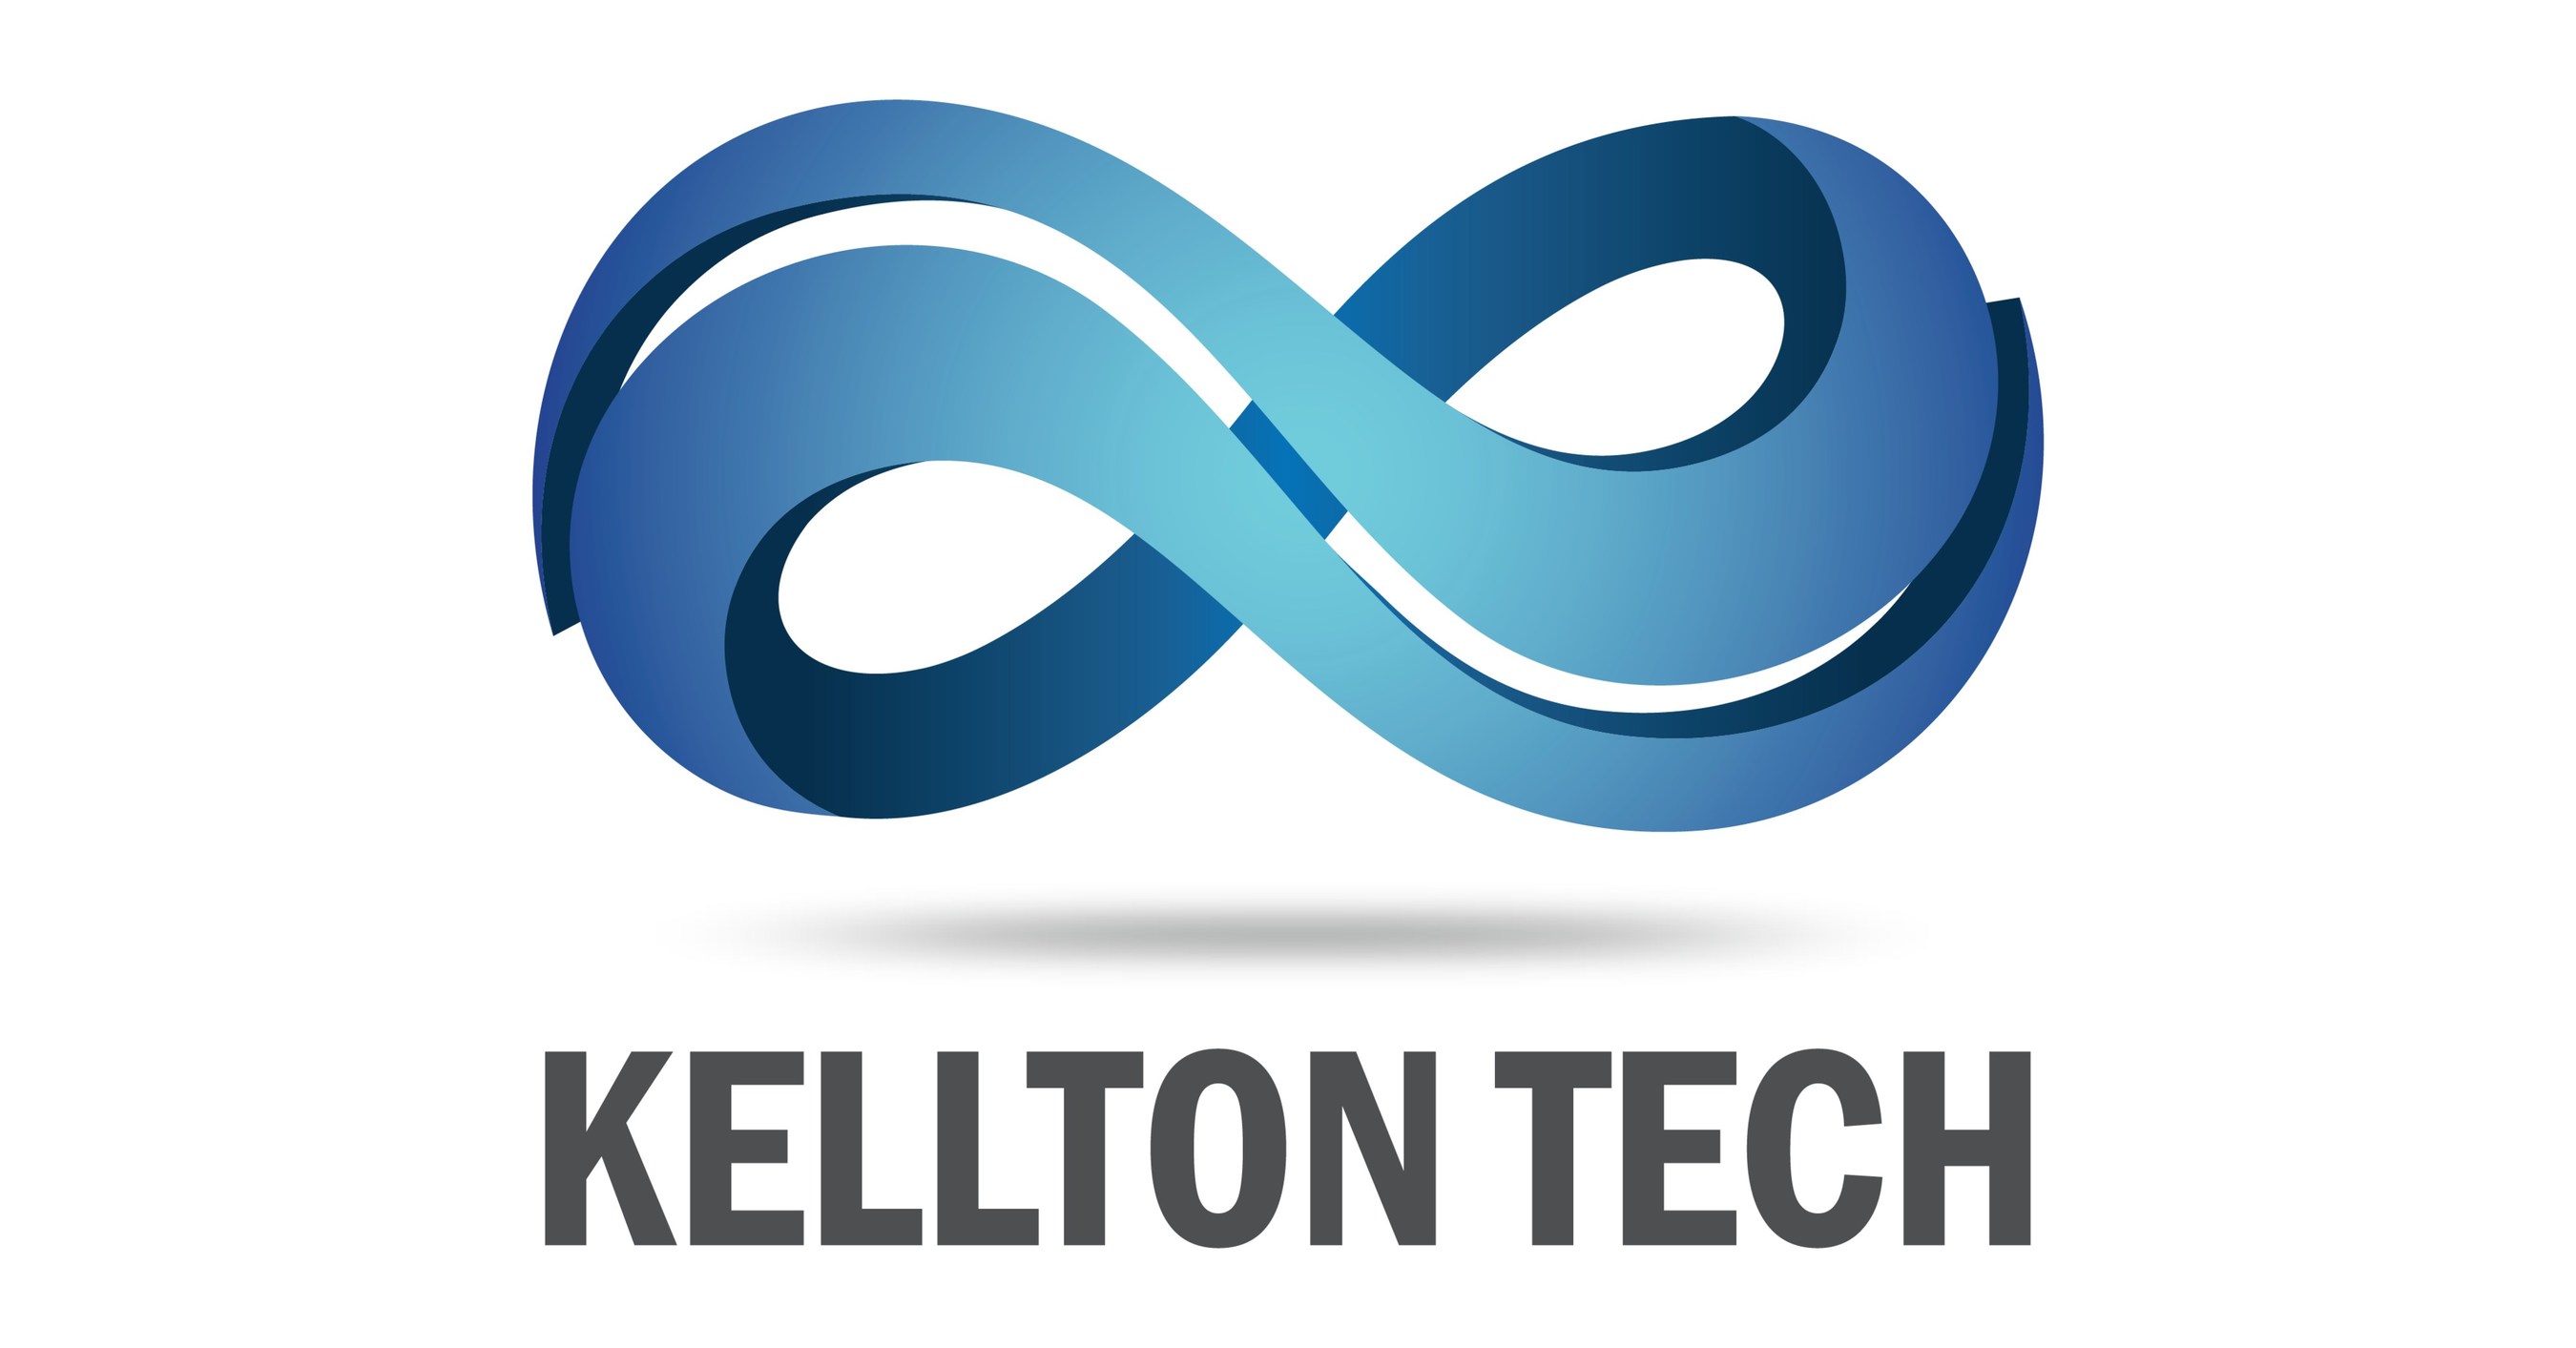 Kellton Tech Announces Strategic Business Restructuring, Integrates Global Operations to Meet Growth Aspirations